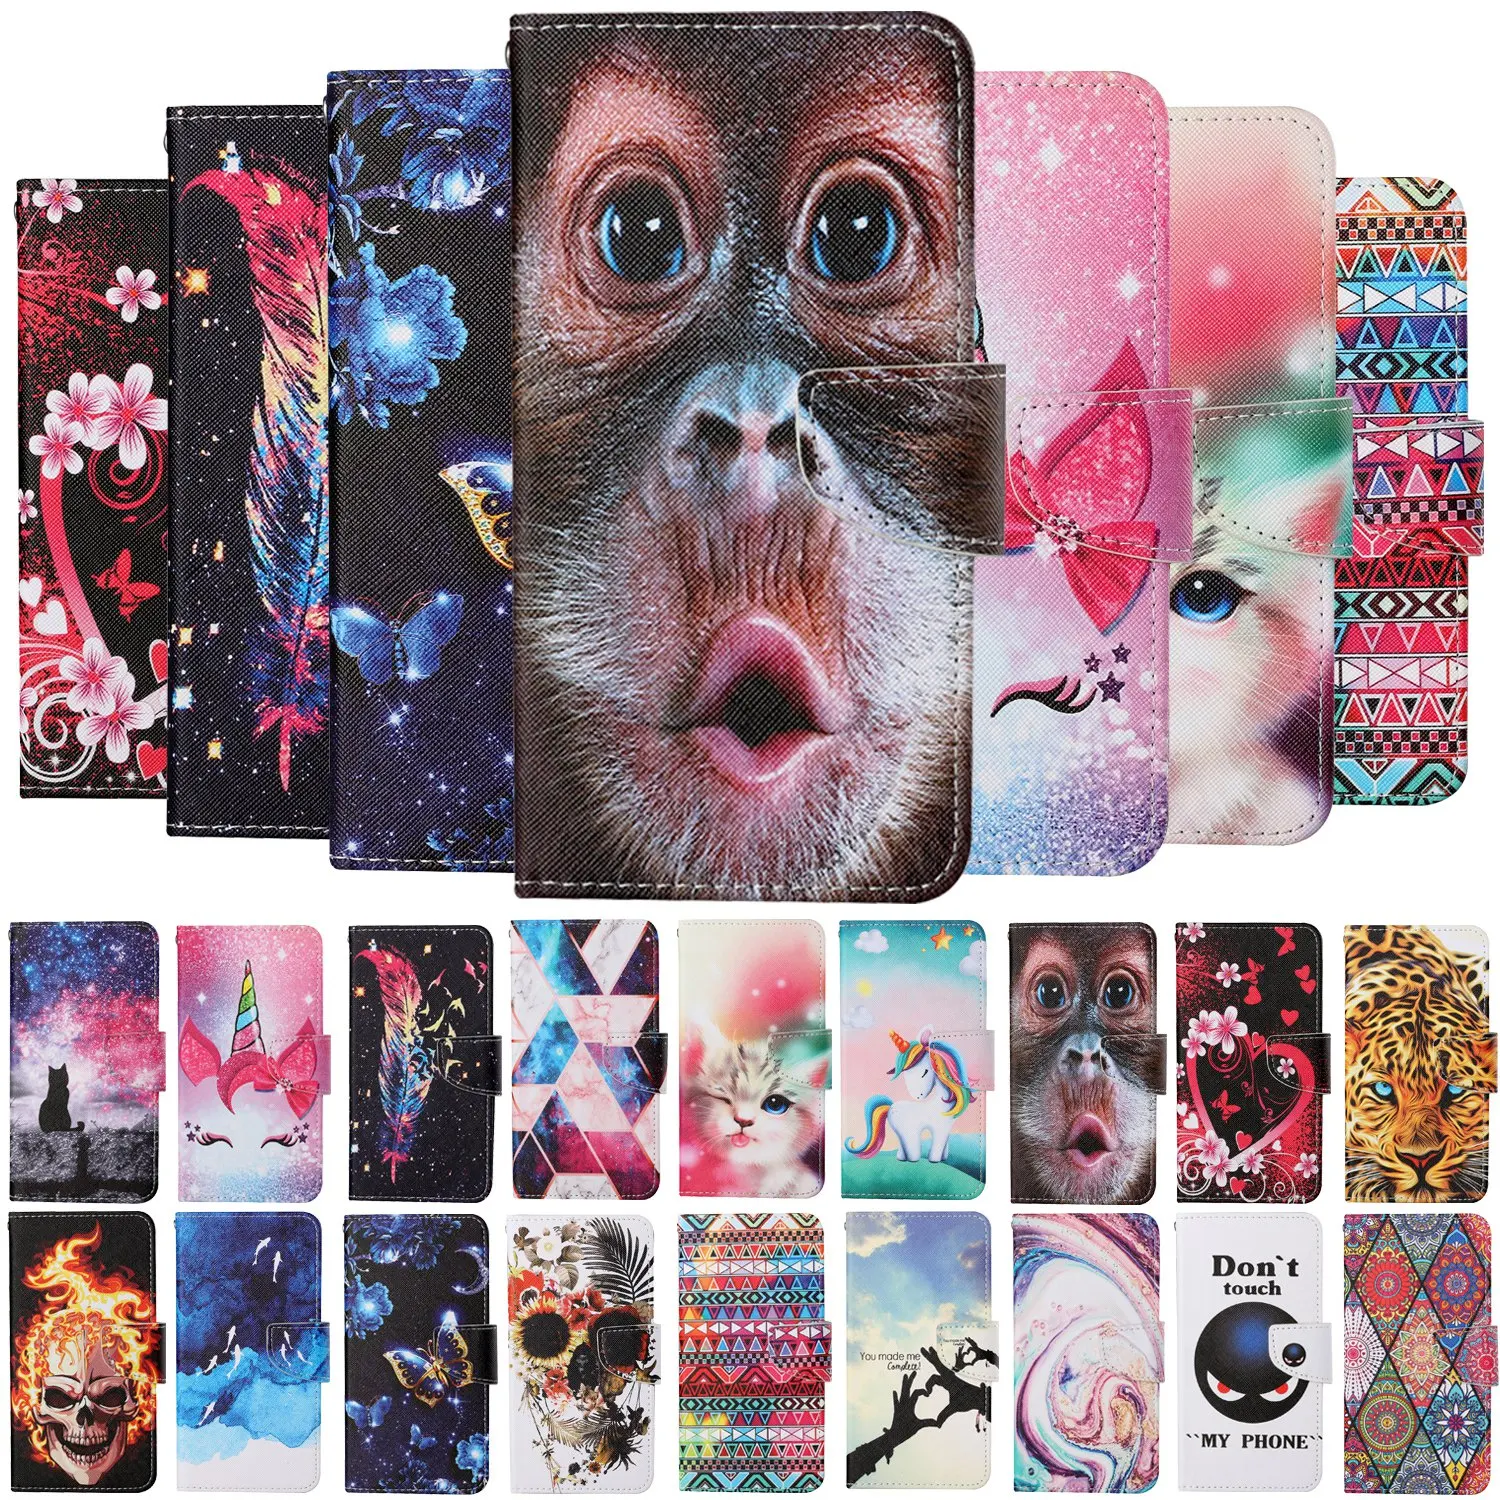 Magnetic Leather Case sFor Samsung Galaxy A51 Case A21s A 51 A71 A31 A41 A01 A21 A11 Wallet Flip Painted Cartoon Cat Cover Etui 1